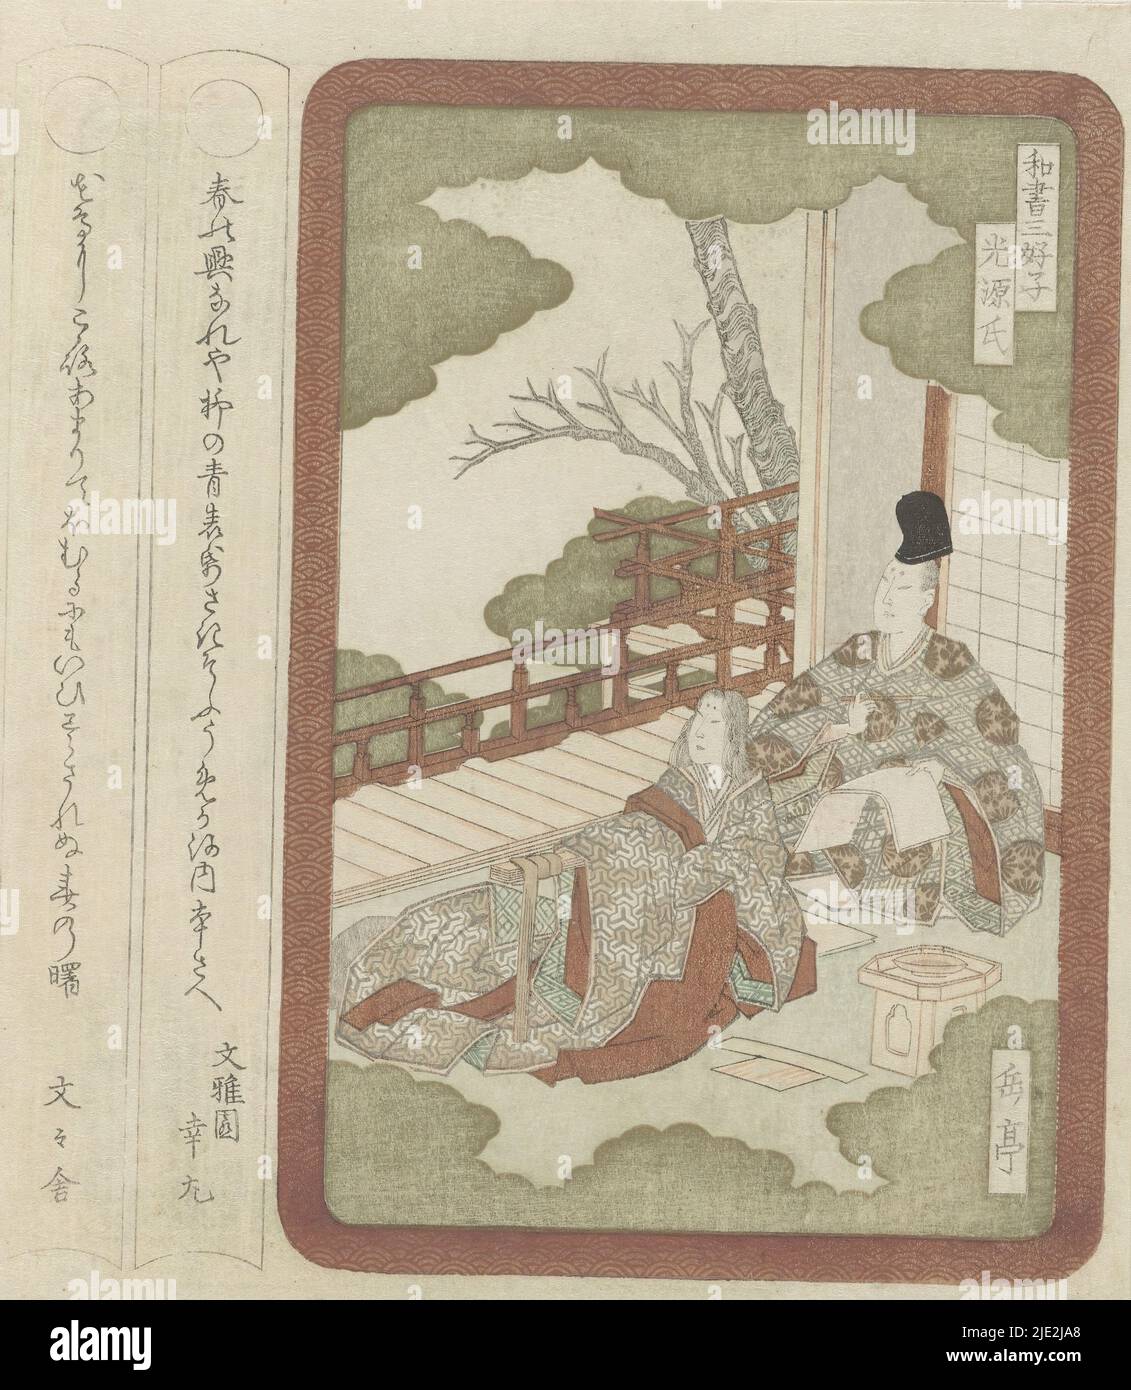 Prince Genji with a court lady, Three gentlemen of Japanese literature (series title), Prince Genji and a court lady take inspiration, sitting on a veranda and looking out over a garden in spring. From the complete series of three surimonos, each depicting one of the 'three gentlemen of Japanese literature' in the presence of a lady. Scene from The Tale of Genji by Murasaki Shikibu., print maker: Yashima Gakutei, (mentioned on object), Japan, 1819 - 1820, paper, color woodcut, height 181 mm × width 207 mm Stock Photo